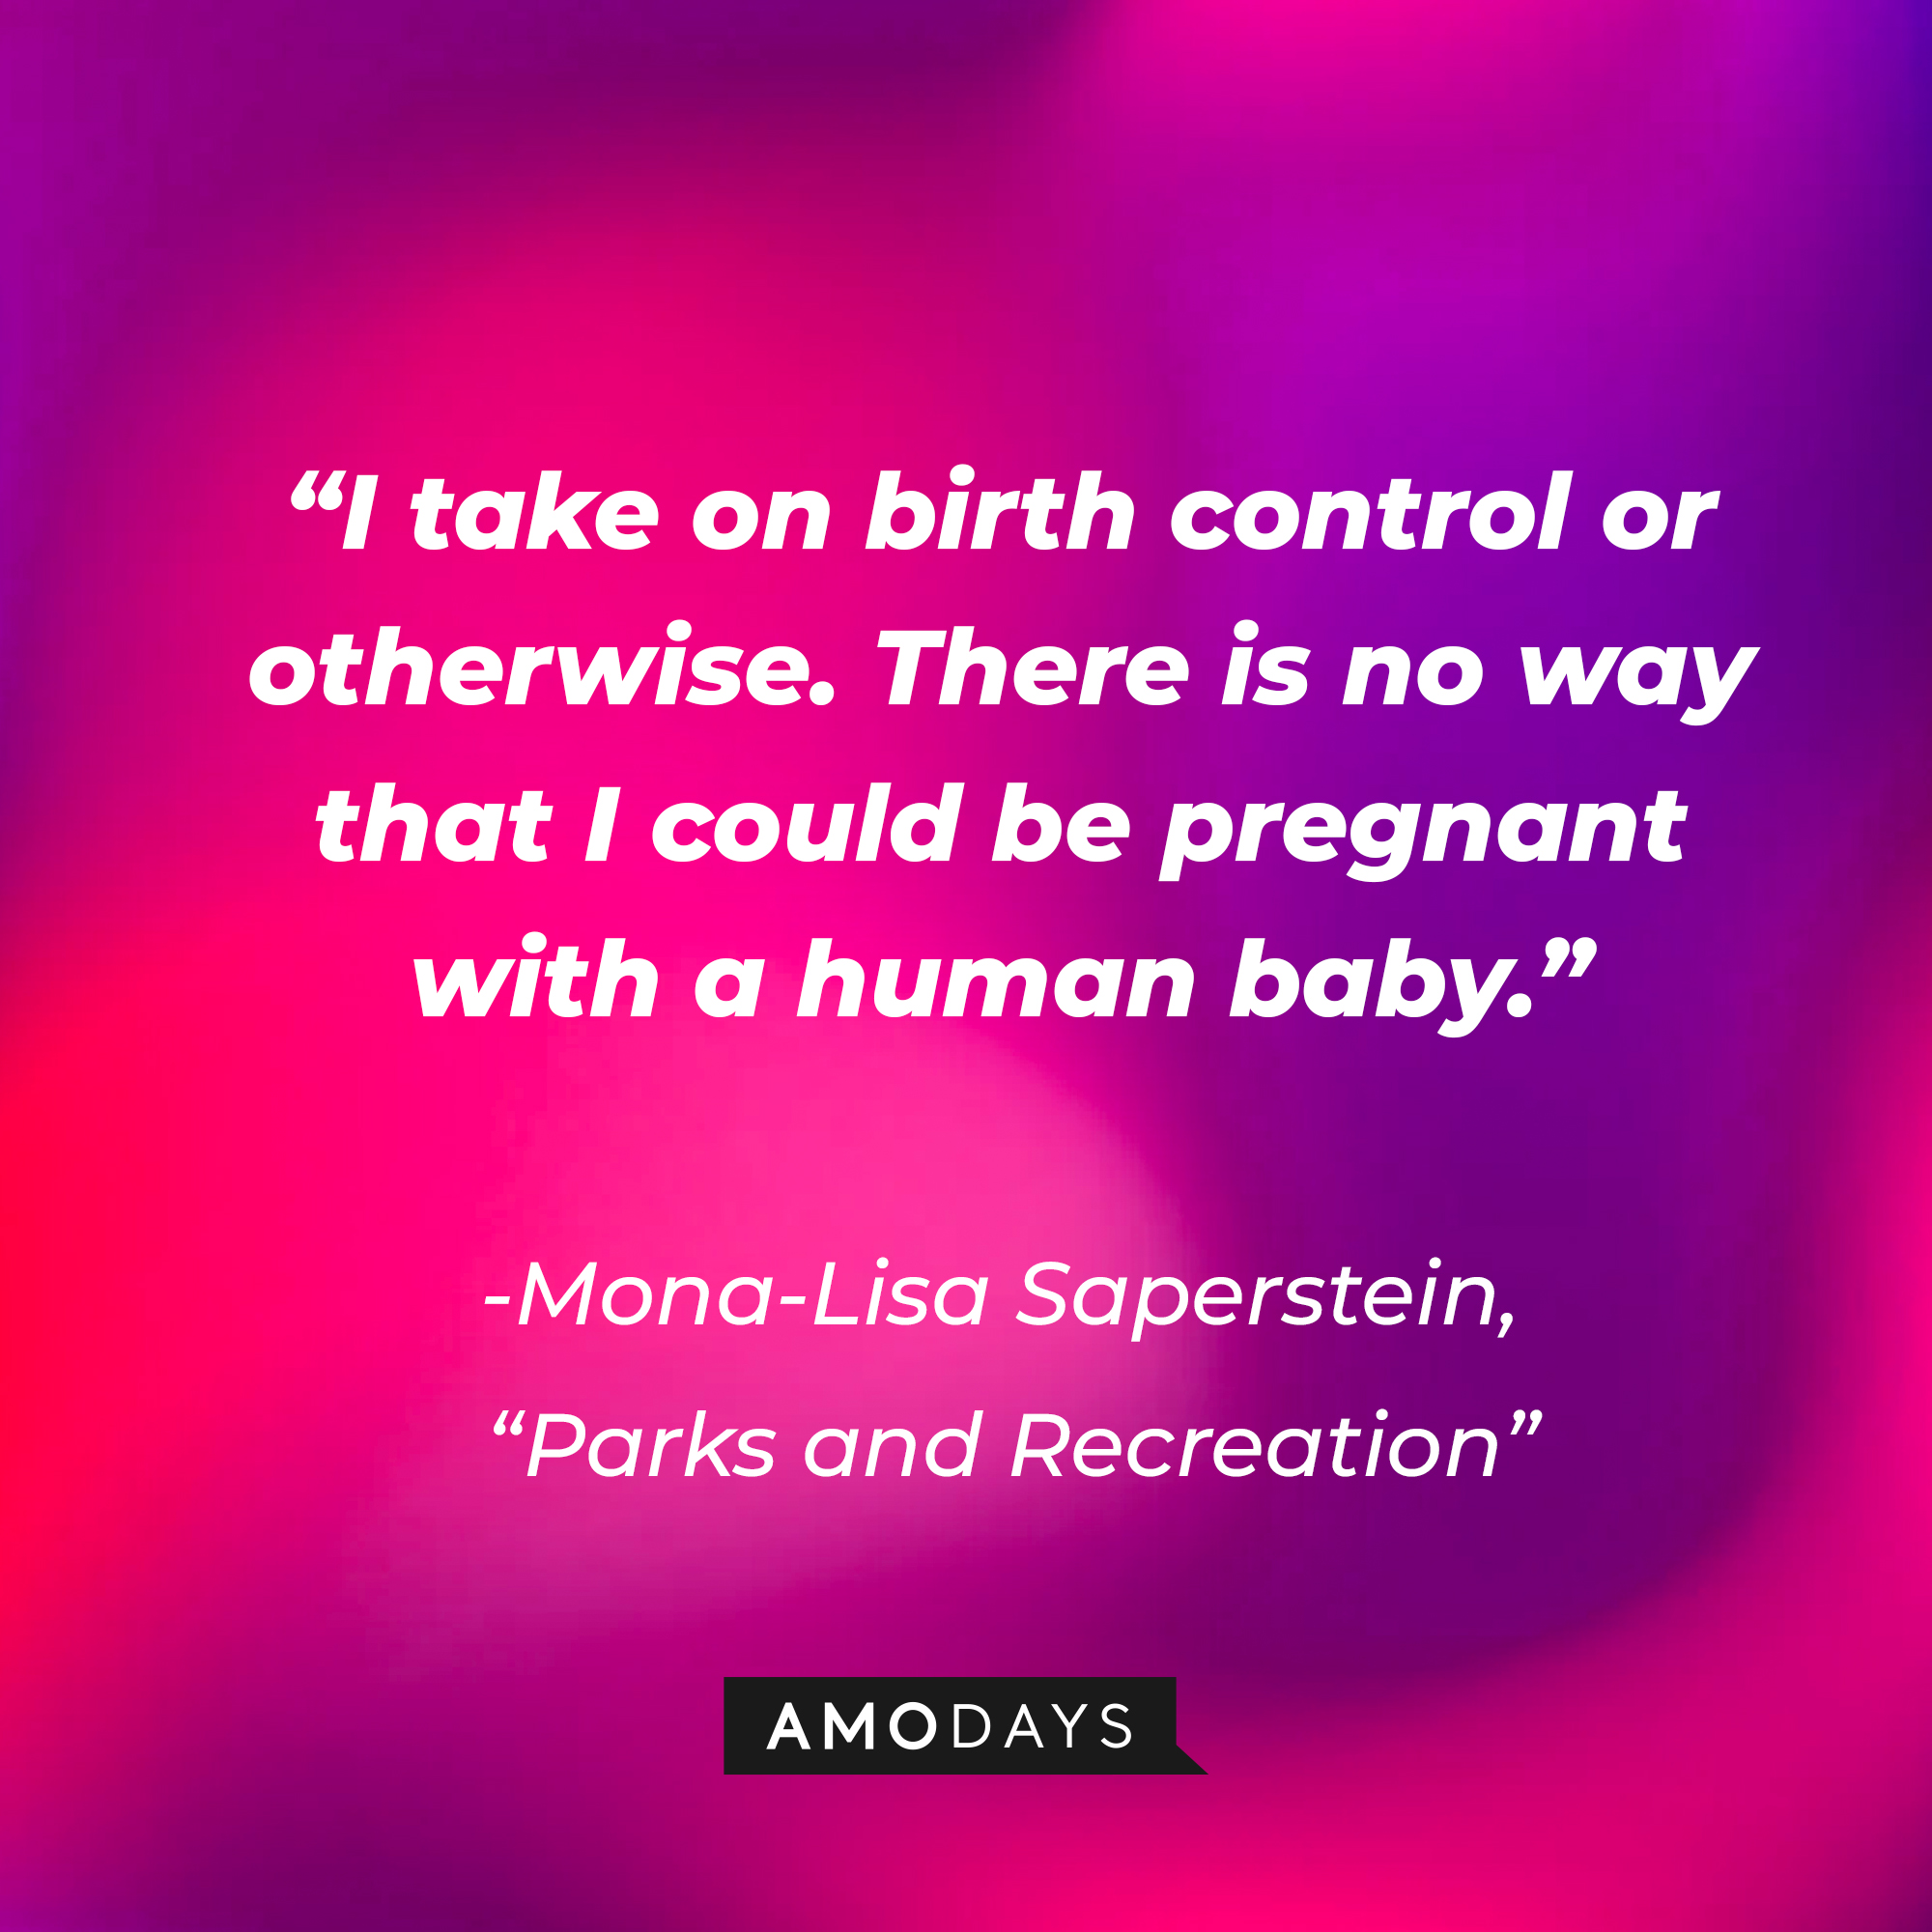 Mona-Lisa Saperstein's quote on "Parks and Recreation:" “I take on birth control or otherwise. There is no way that I could be pregnant with a human baby." | Source: AmoDays